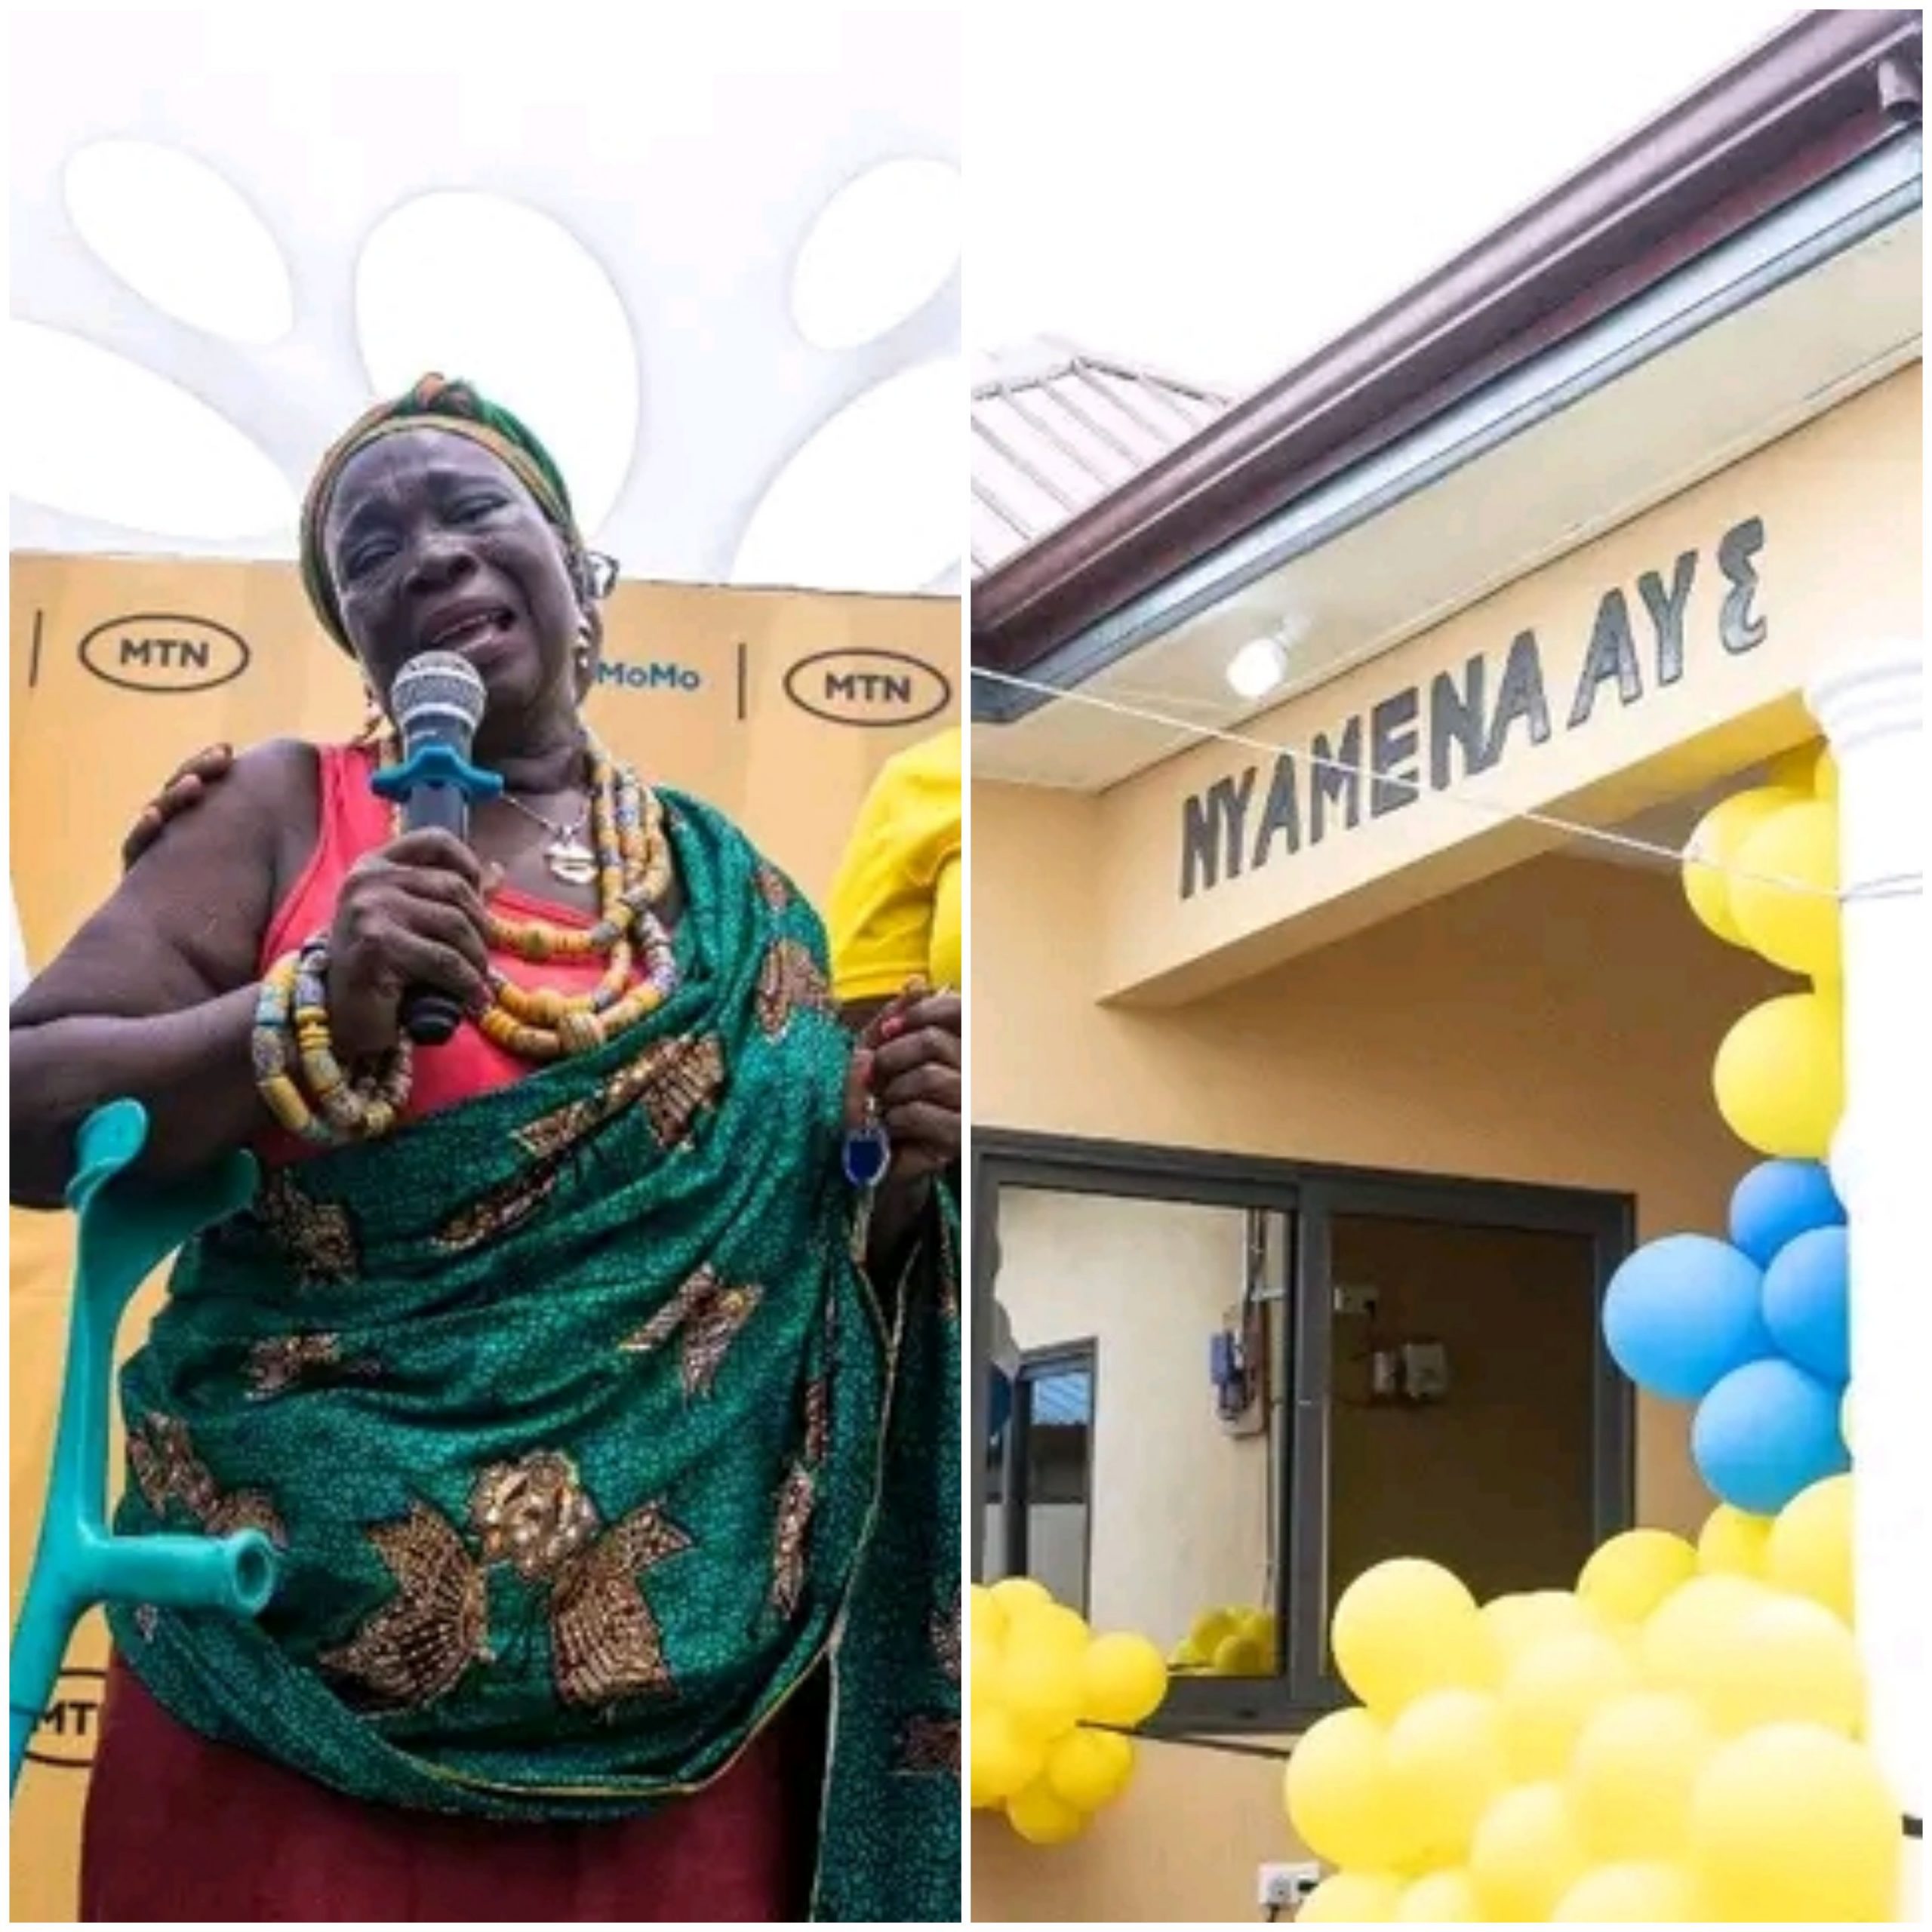 Madam Rita - the Woman who acted MTN MoMo first TV commercial gets house from MTN Ghana